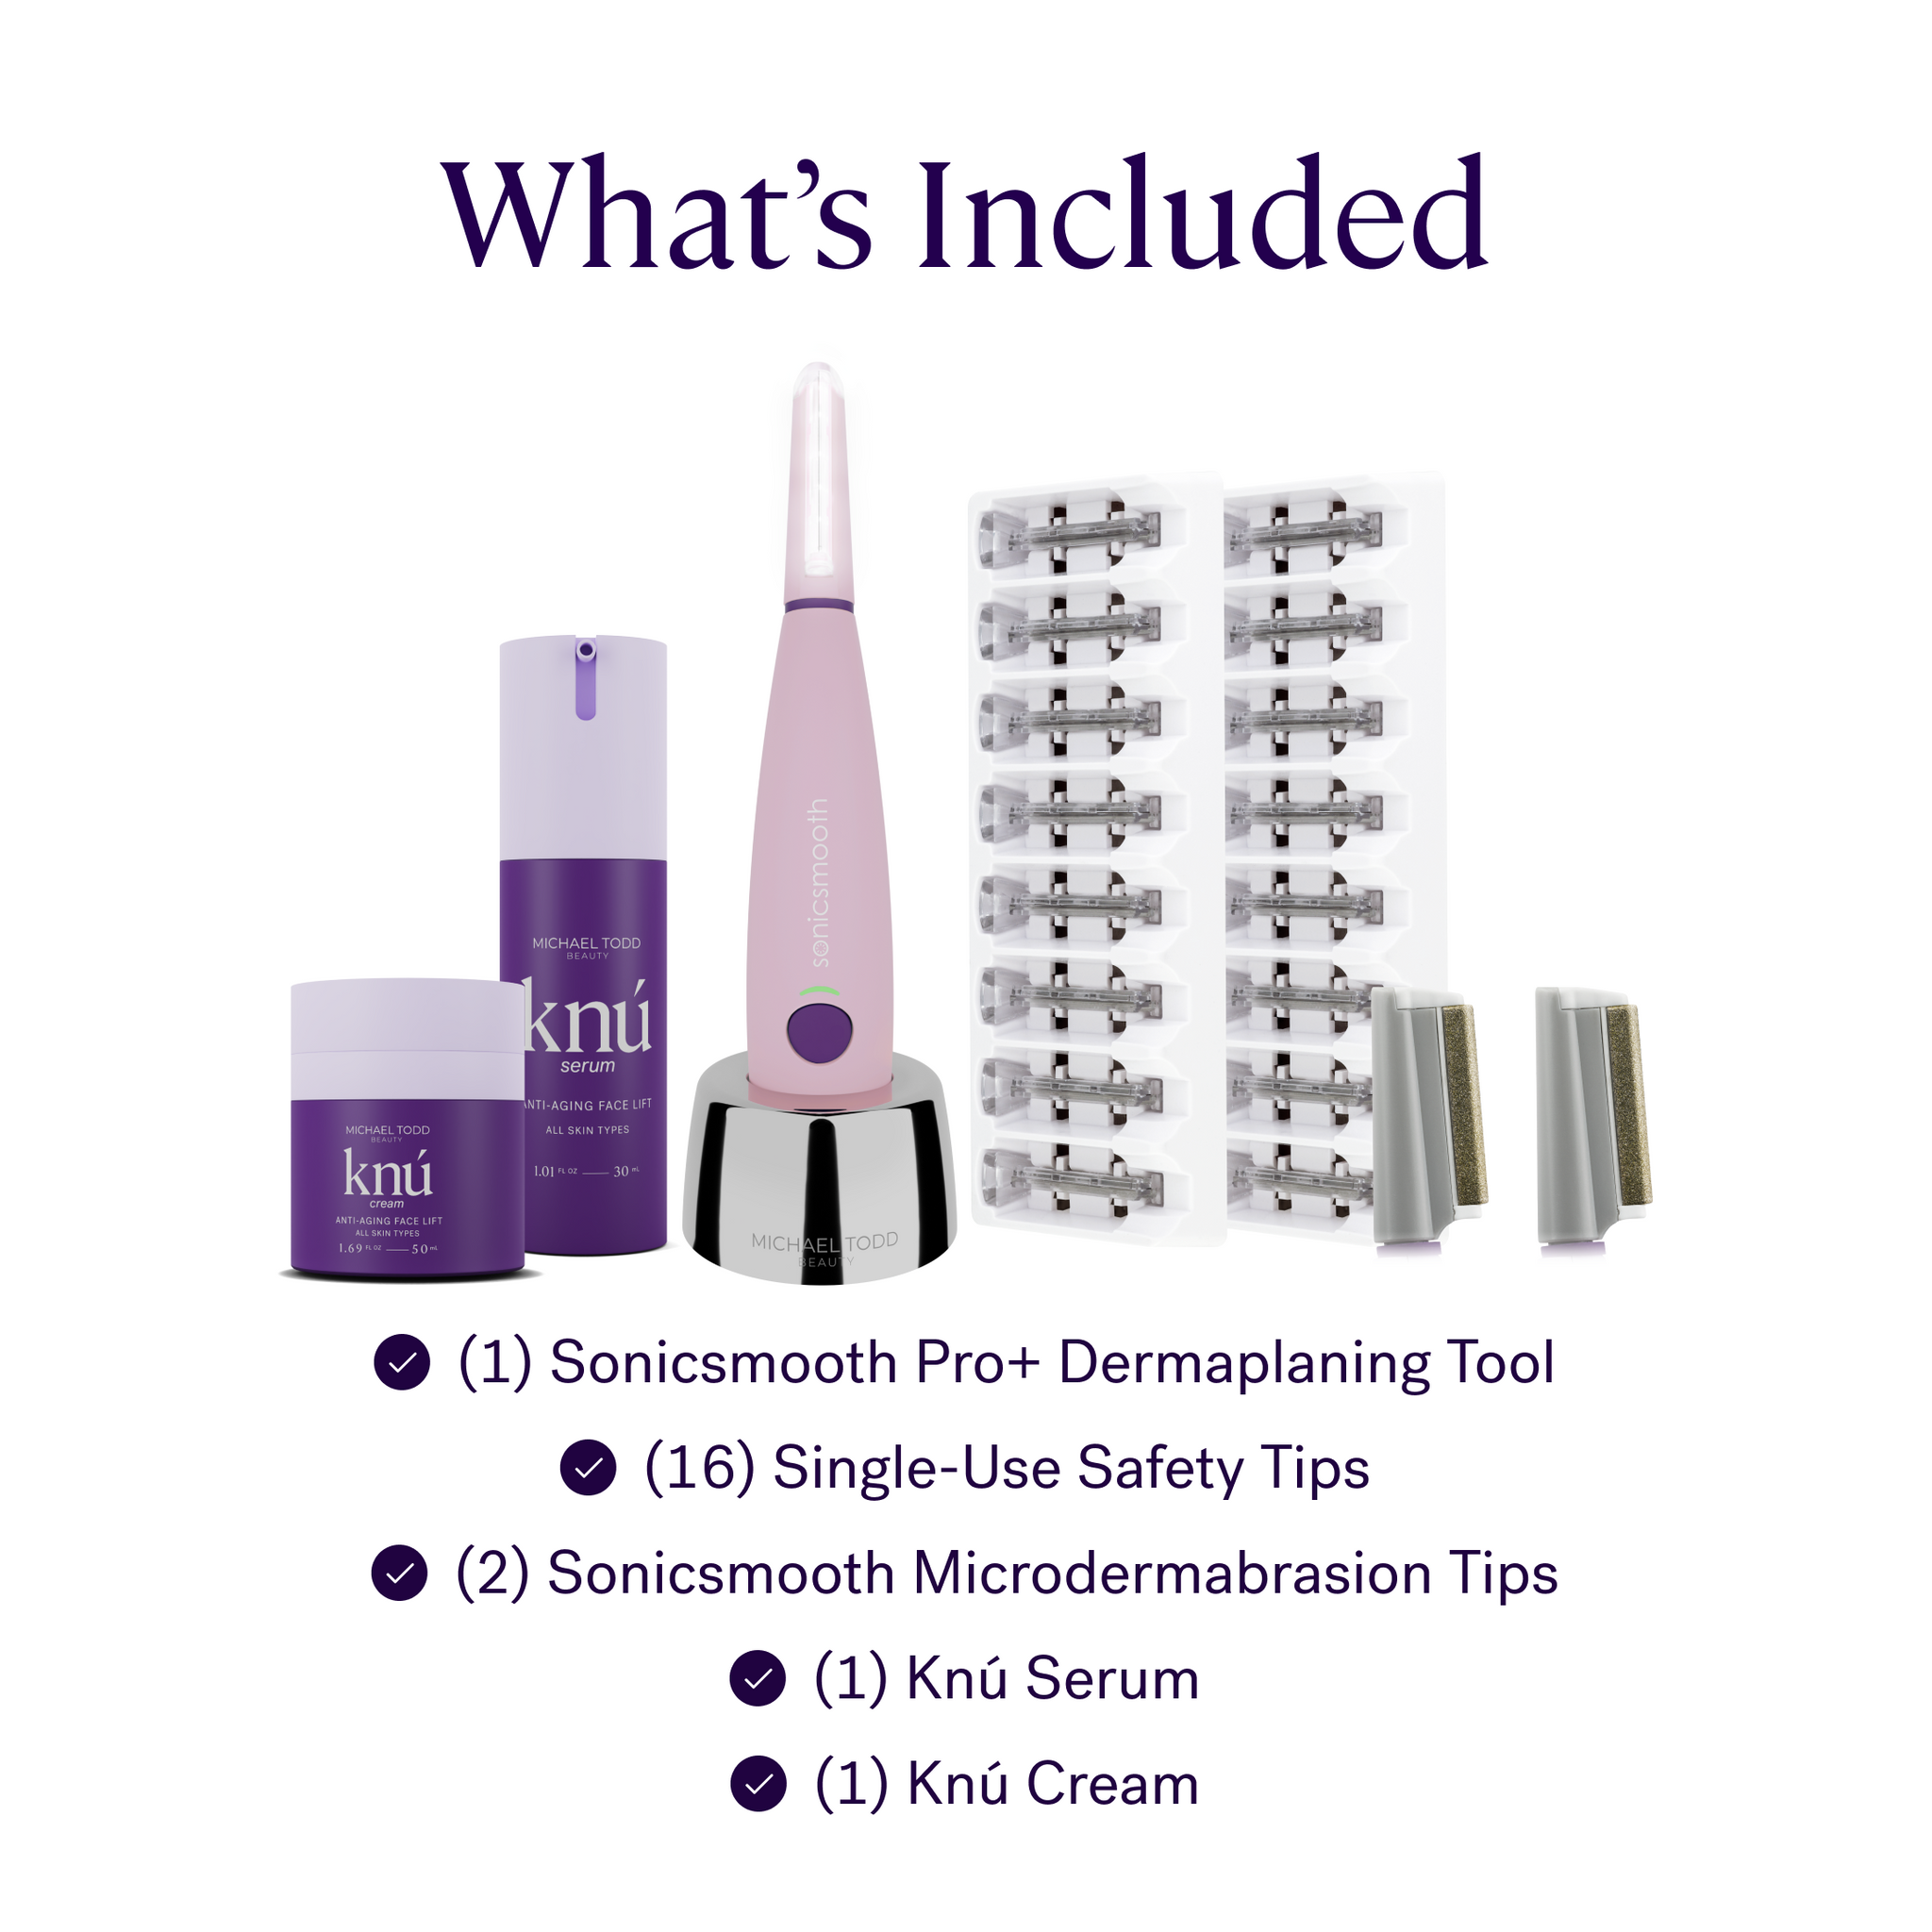 Image displaying a Michael Todd Beauty skincare set including a 4 in 1 Dermaplaning & Post Treatment System, single-use safety tips, microdermabrasion tips, serum, and cream, labeled with quantities and purposes.